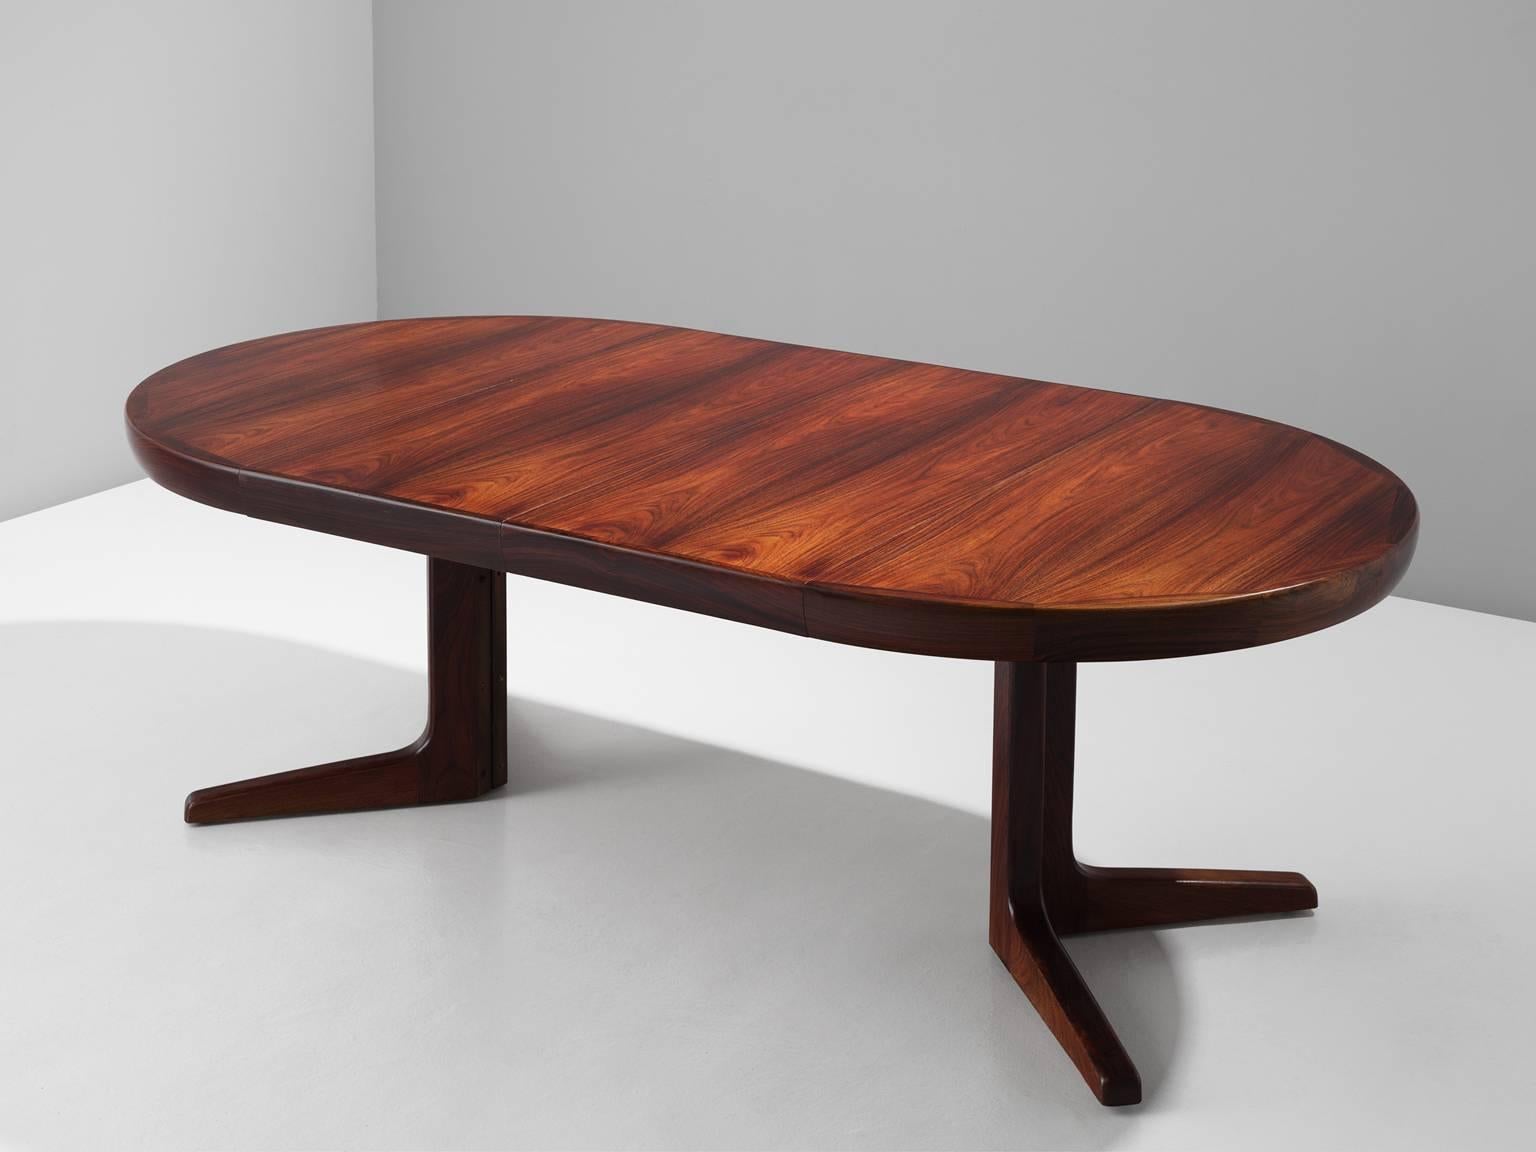 Dining table with two leaves, in rosewood, by Faarup, Denmark, 1960s. 

Elegant extendable dining table in rosewood with two additional leaves. The table has an round tabletop. The two legs together form a diagonal cross. This table is designed in